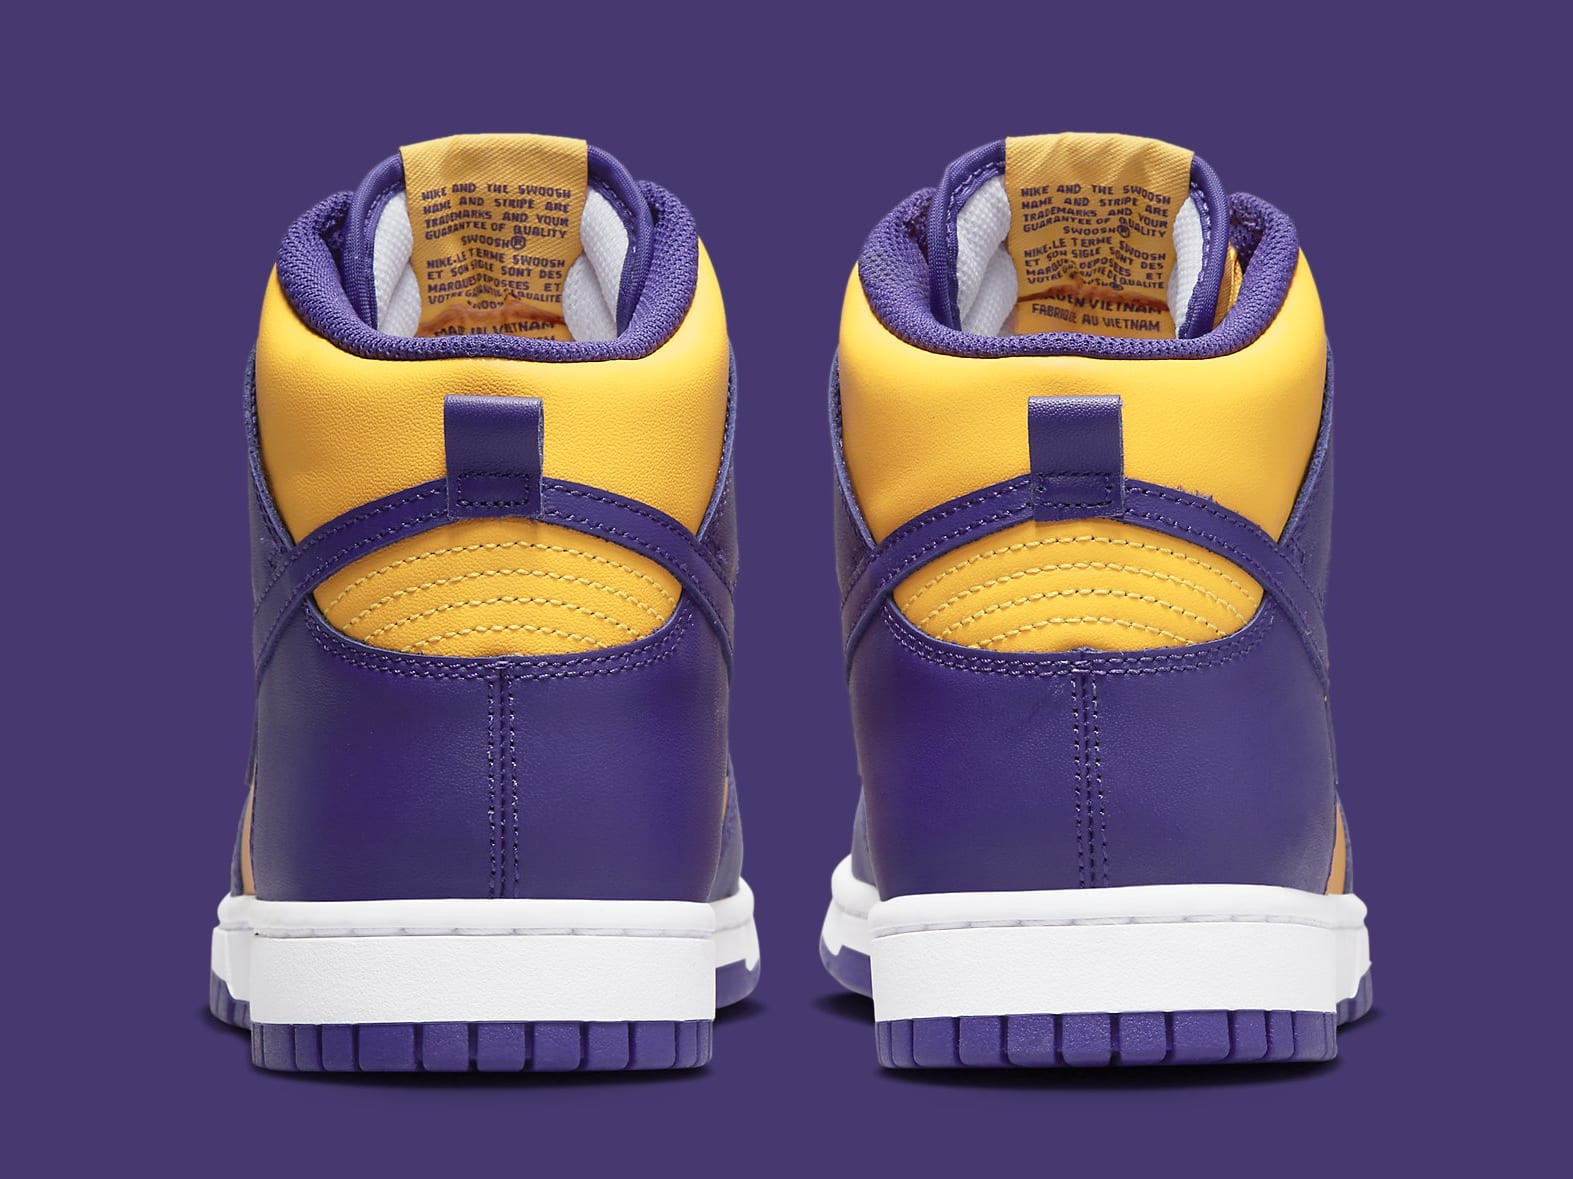 Nike Dunk High Lakers Release Date Revealed: Official Photos